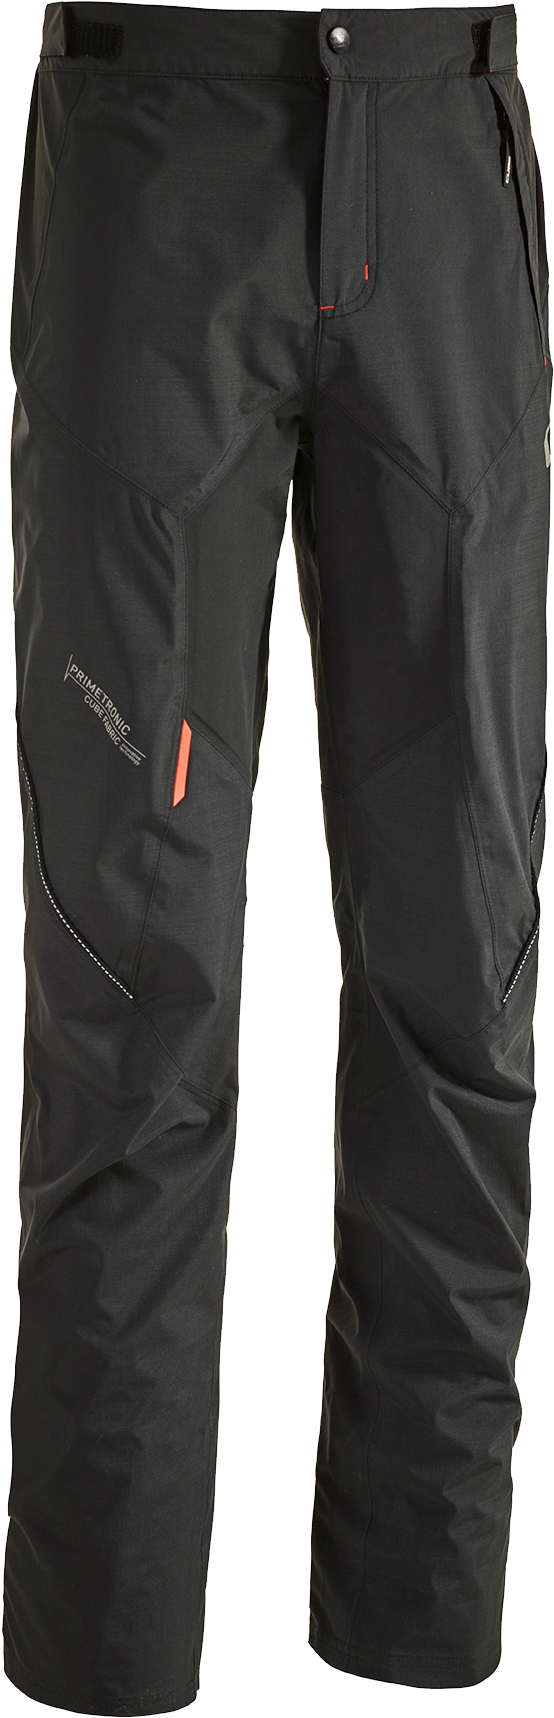 Black Outdoor Performance Pants PNG